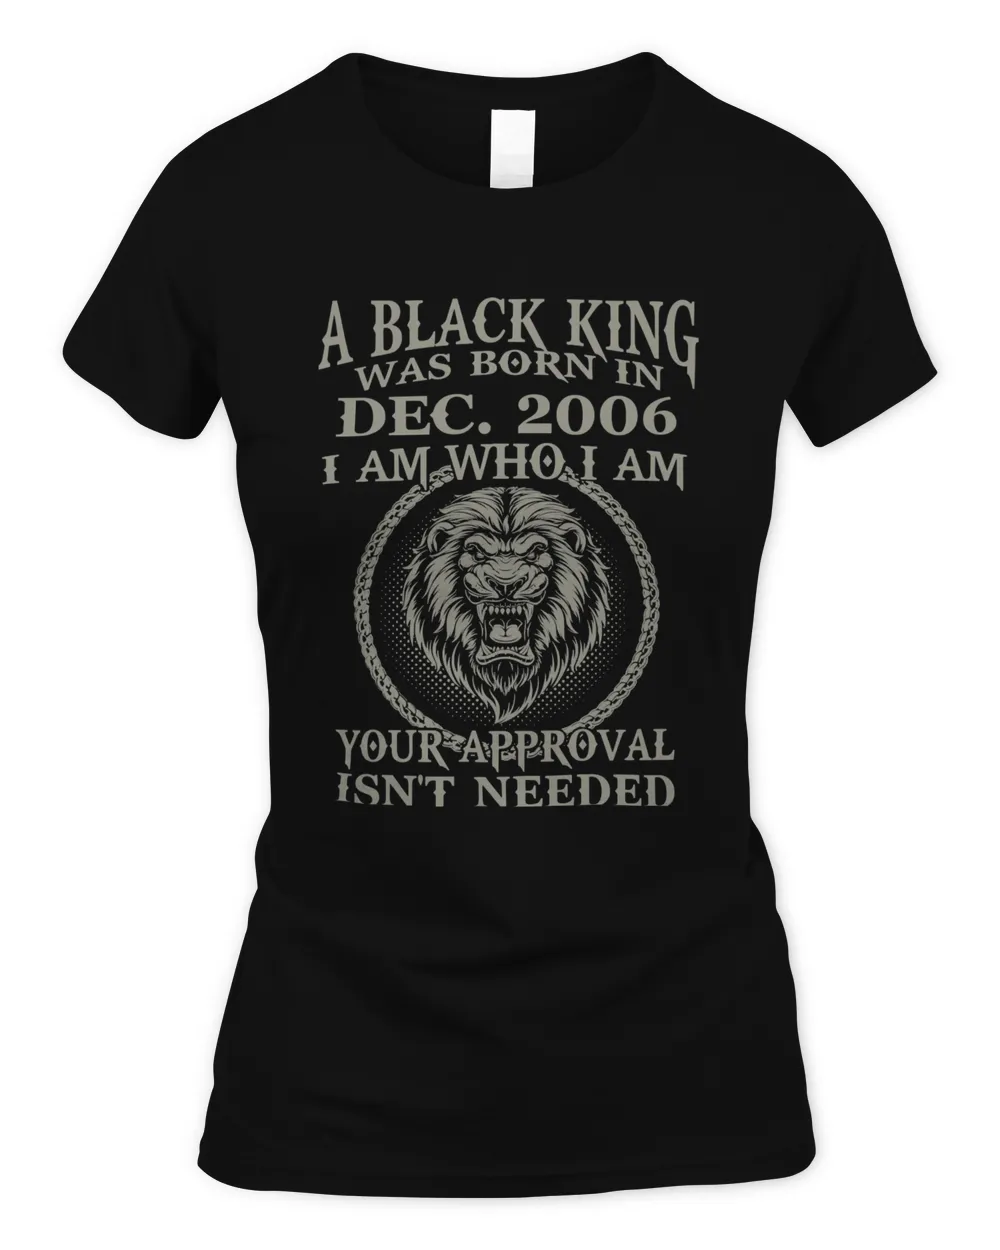 Black King Are Born In DECEMBER 2006. Black King Was Born In DECEMBER 2006 Classic T-Shirt